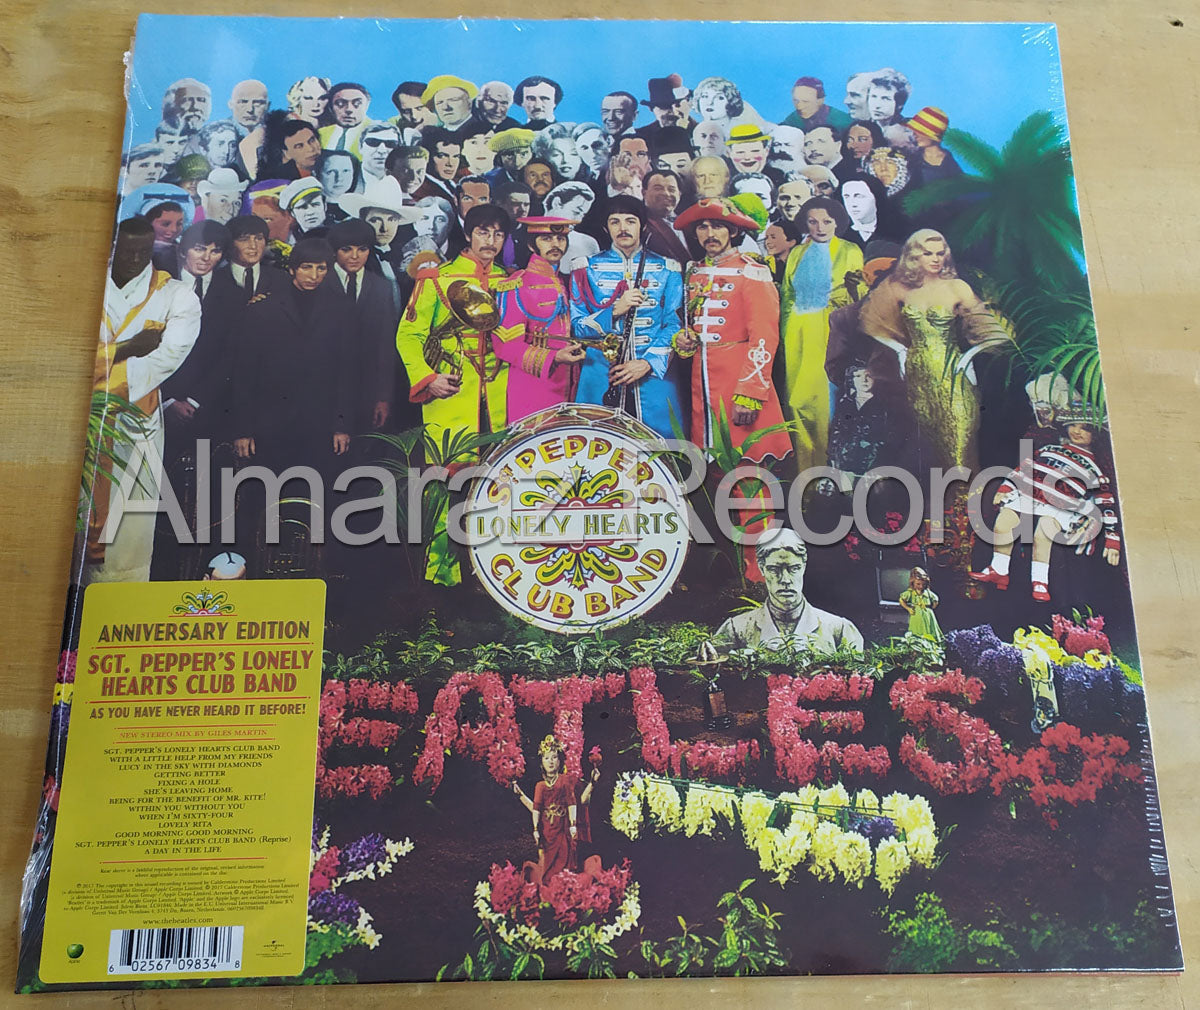 The Beatles Sgt. Peppers Lonely Hearts Club Band Vinyl Anniversary Edition LP